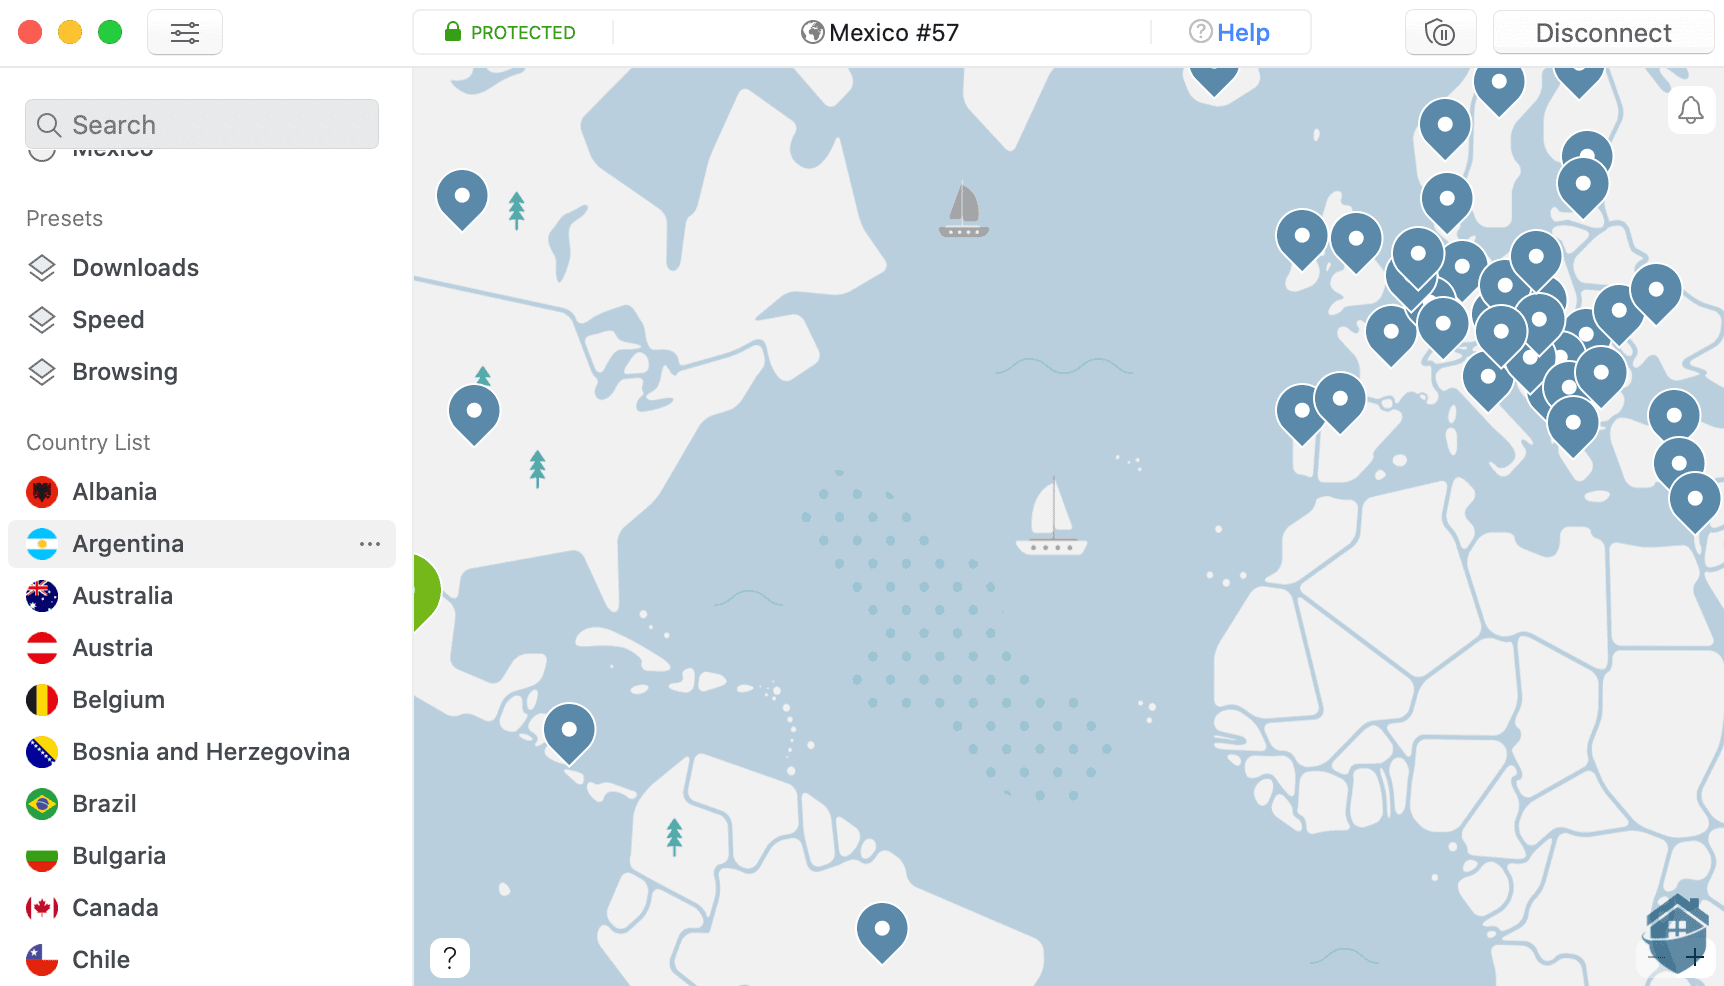 NordVPN's dashboard showing various connections